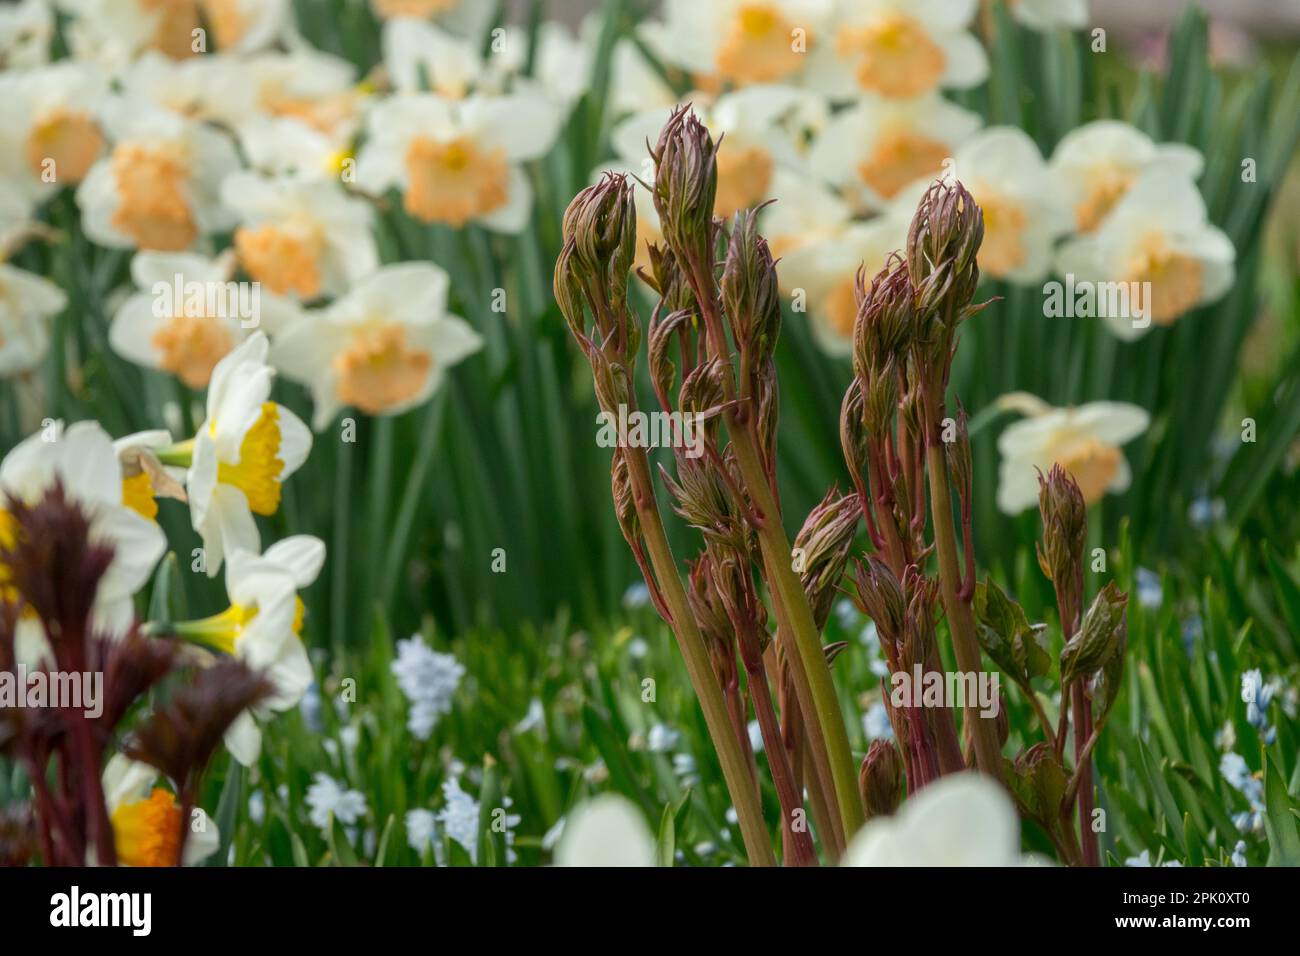 Early spring garden, Paeonia, Shoots, Daffodils Stock Photo